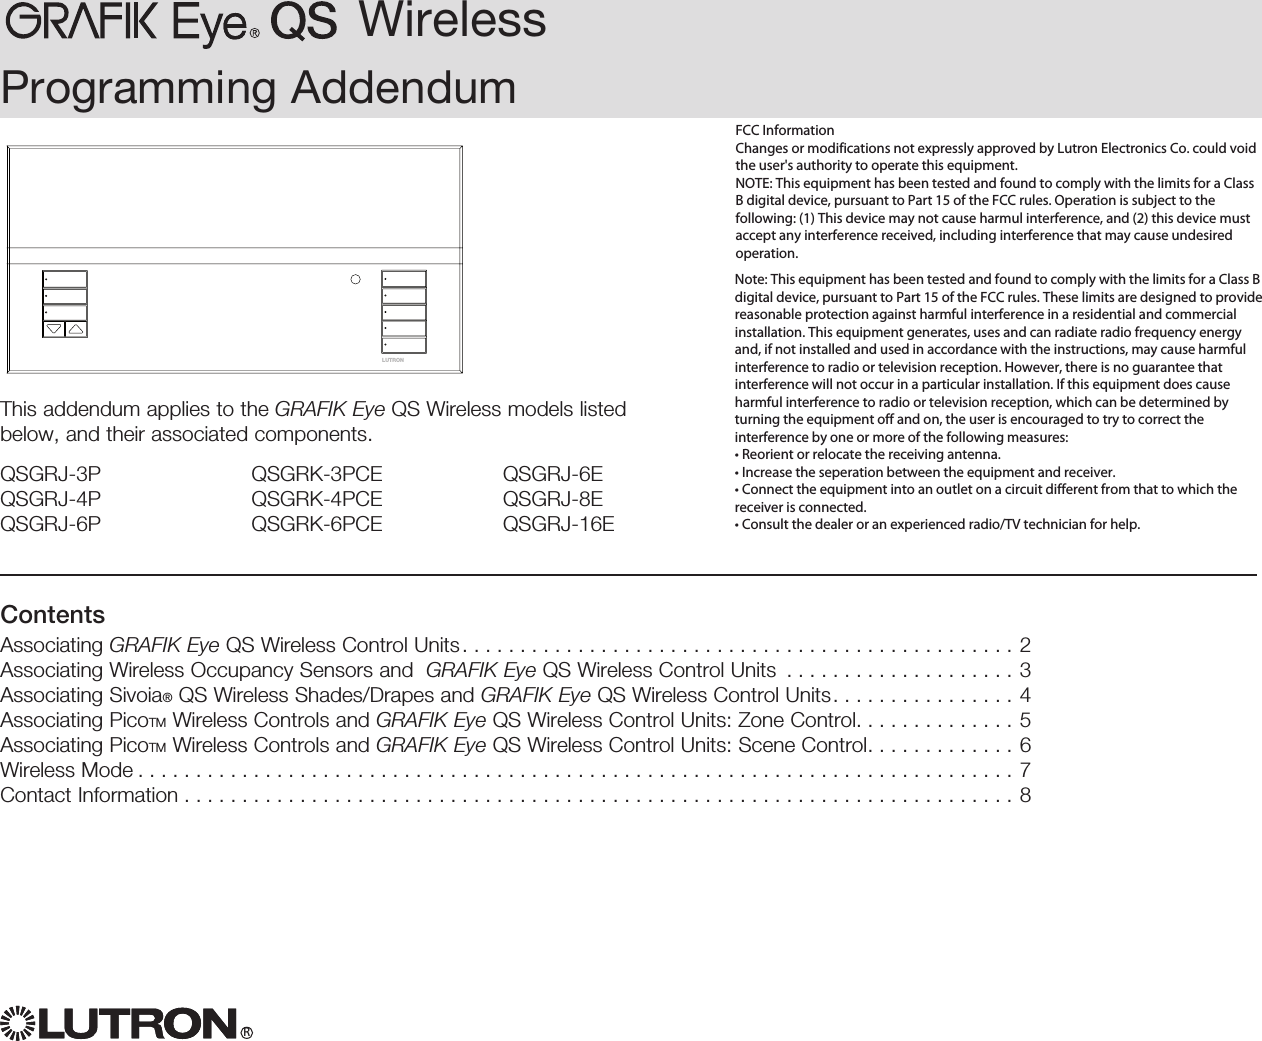 WirelessRProgramming AddendumLUTRONThis addendum applies to the GRAFIK Eye QS Wireless models listed below, and their associated components.QSGRJ-3PQSGRJ-4PQSGRJ-6PQSGRK-3PCEQSGRK-4PCEQSGRK-6PCEQSGRJ-6EQSGRJ-8EQSGRJ-16EContentsAssociating GRAFIK Eye QS Wireless Control Units................................................2Associating Wireless Occupancy Sensors and  GRAFIK Eye QS Wireless Control Units  . . . . . . . . . . . . . . . . . . . . 3Associating Sivoia® QS Wireless Shades/Drapes and GRAFIK Eye QS Wireless Control Units. . . . . . . . . . . . . . . . 4Associating PicoTM Wireless Controls and GRAFIK Eye QS Wireless Control Units: Zone Control. . . . . . . . . . . . . . 5Associating PicoTM Wireless Controls and GRAFIK Eye QS Wireless Control Units: Scene Control. . . . . . . . . . . . . 6Wireless Mode............................................................................7Contact Information ........................................................................8FCC Information Changes or modifications not expressly approved by Lutron Electronics Co. could void the user&apos;s authority to operate this equipment. NOTE: This equipment has been tested and found to comply with the limits for a Class B digital device, pursuant to Part 15 of the FCC rules. Operation is subject to the following: (1) This device may not cause harmul interference, and (2) this device must accept any interference received, including interference that may cause undesired operation.Note: This equipment has been tested and found to comply with the limits for a Class B digital device, pursuant to Part 15 of the FCC rules. These limits are designed to provide reasonable protection against harmful interference in a residential and commercial installation. This equipment generates, uses and can radiate radio frequency energy and, if not installed and used in accordance with the instructions, may cause harmful interference to radio or television reception. However, there is no guarantee that interference will not occur in a particular installation. If this equipment does cause harmful interference to radio or television reception, which can be determined by turning the equipment off and on, the user is encouraged to try to correct the interference by one or more of the following measures: • Reorient or relocate the receiving antenna. • Increase the seperation between the equipment and receiver. • Connect the equipment into an outlet on a circuit different from that to which the receiver is connected. • Consult the dealer or an experienced radio/TV technician for help.